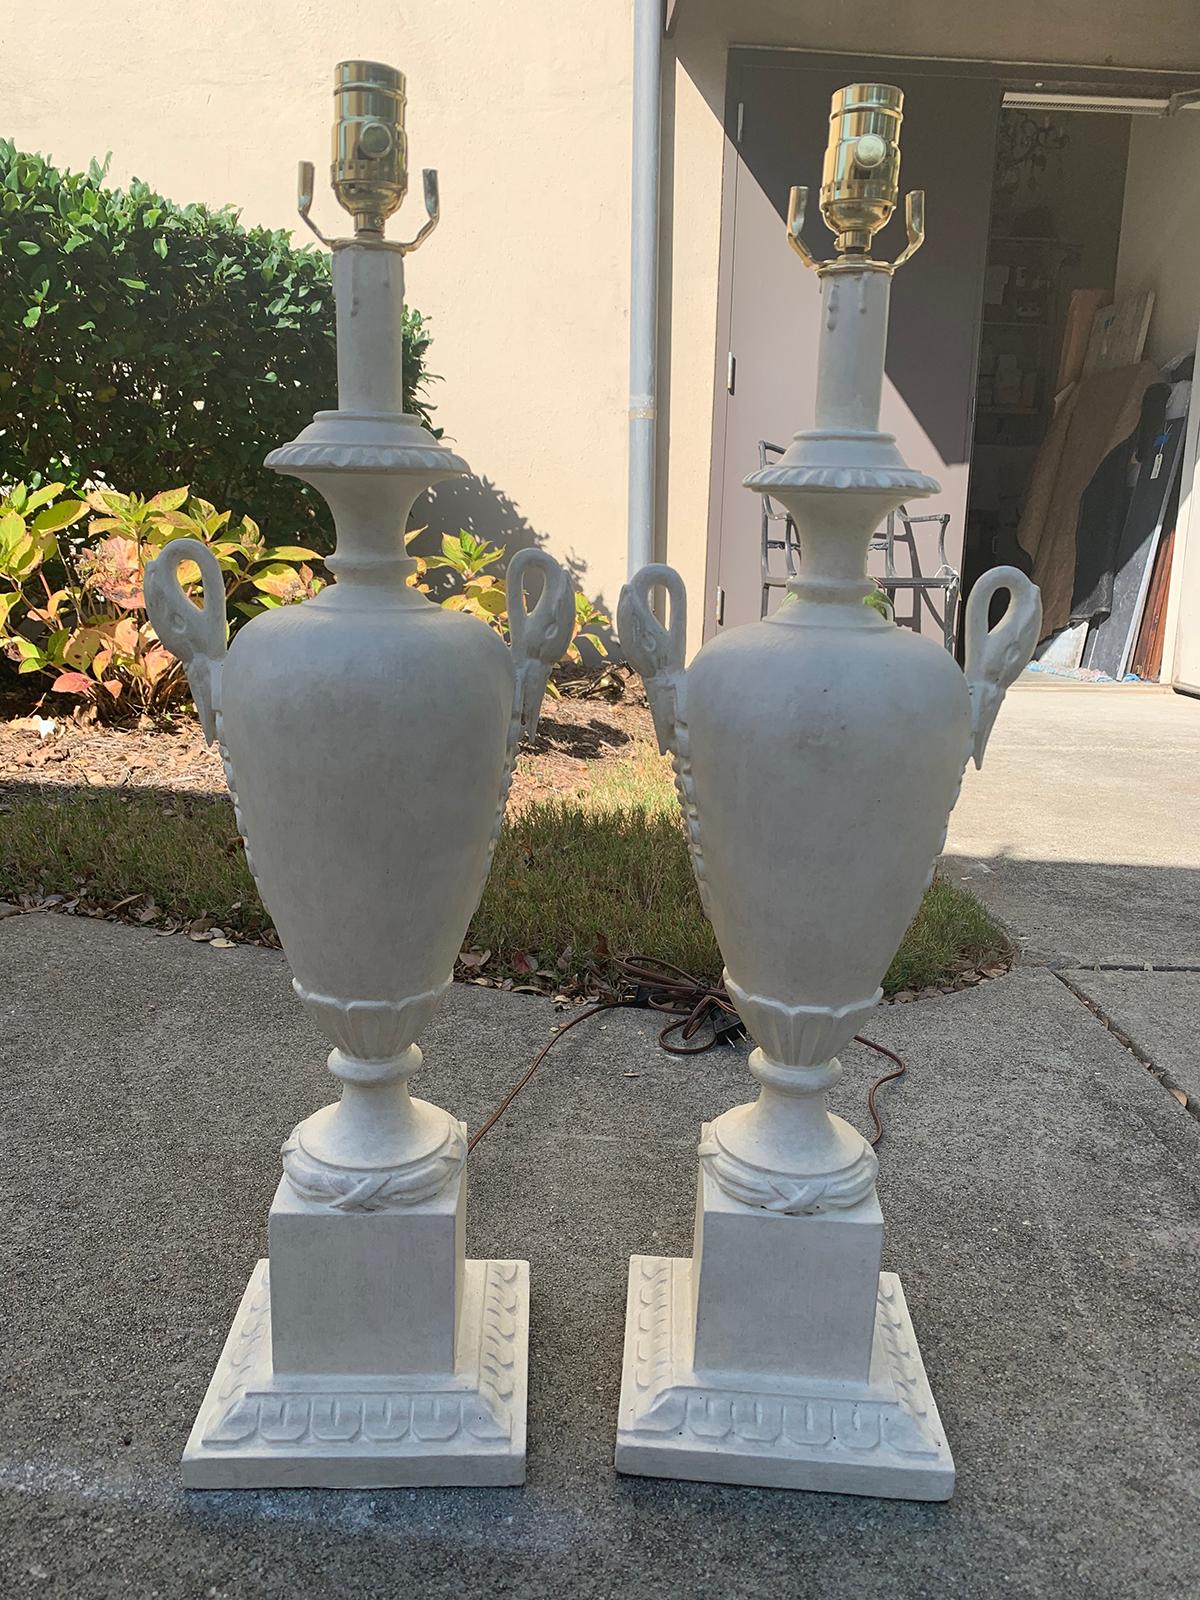 Pair of 20th century circa 1940s Italian neoclassical custom painted table lamps with swan motif. Finish is hand painted linen white
New wiring.